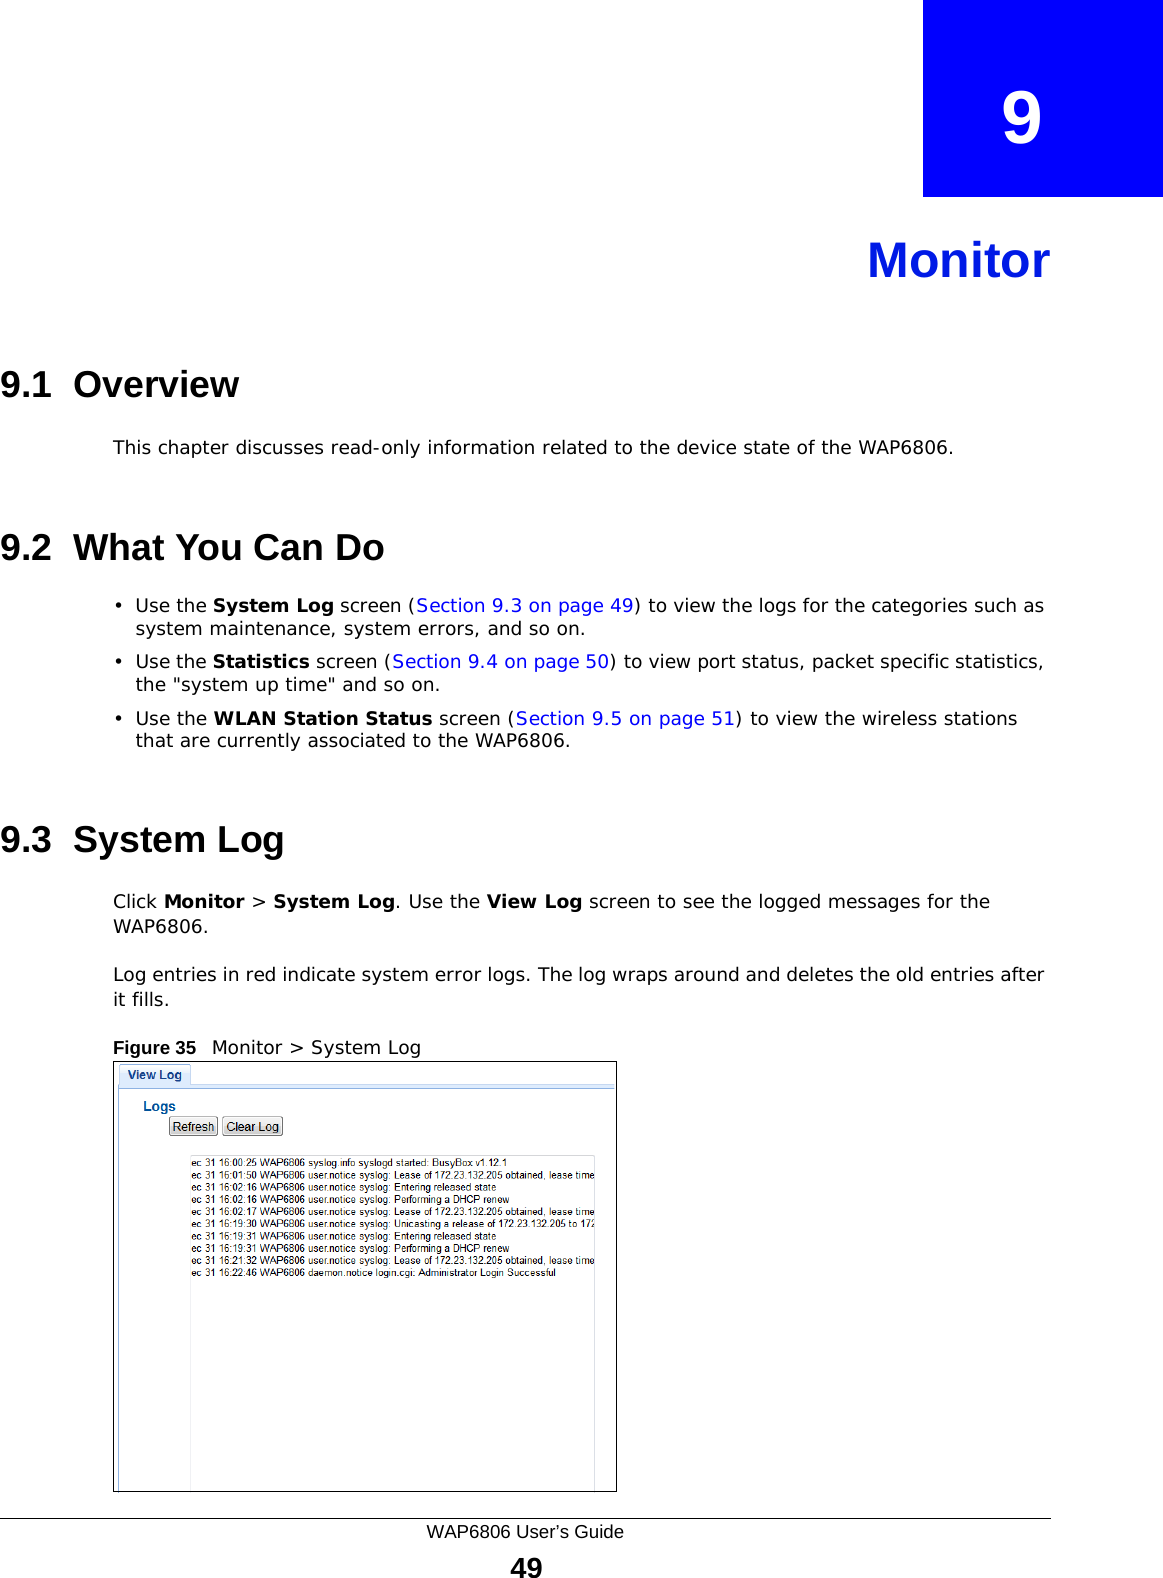 WAP6806 User’s Guide49CHAPTER   9Monitor9.1  OverviewThis chapter discusses read-only information related to the device state of the WAP6806. 9.2  What You Can Do•Use the System Log screen (Section 9.3 on page 49) to view the logs for the categories such as system maintenance, system errors, and so on.•Use the Statistics screen (Section 9.4 on page 50) to view port status, packet specific statistics, the &quot;system up time&quot; and so on.•Use the WLAN Station Status screen (Section 9.5 on page 51) to view the wireless stations that are currently associated to the WAP6806.9.3  System LogClick Monitor &gt; System Log. Use the View Log screen to see the logged messages for the WAP6806. Log entries in red indicate system error logs. The log wraps around and deletes the old entries after it fills. Figure 35   Monitor &gt; System Log 